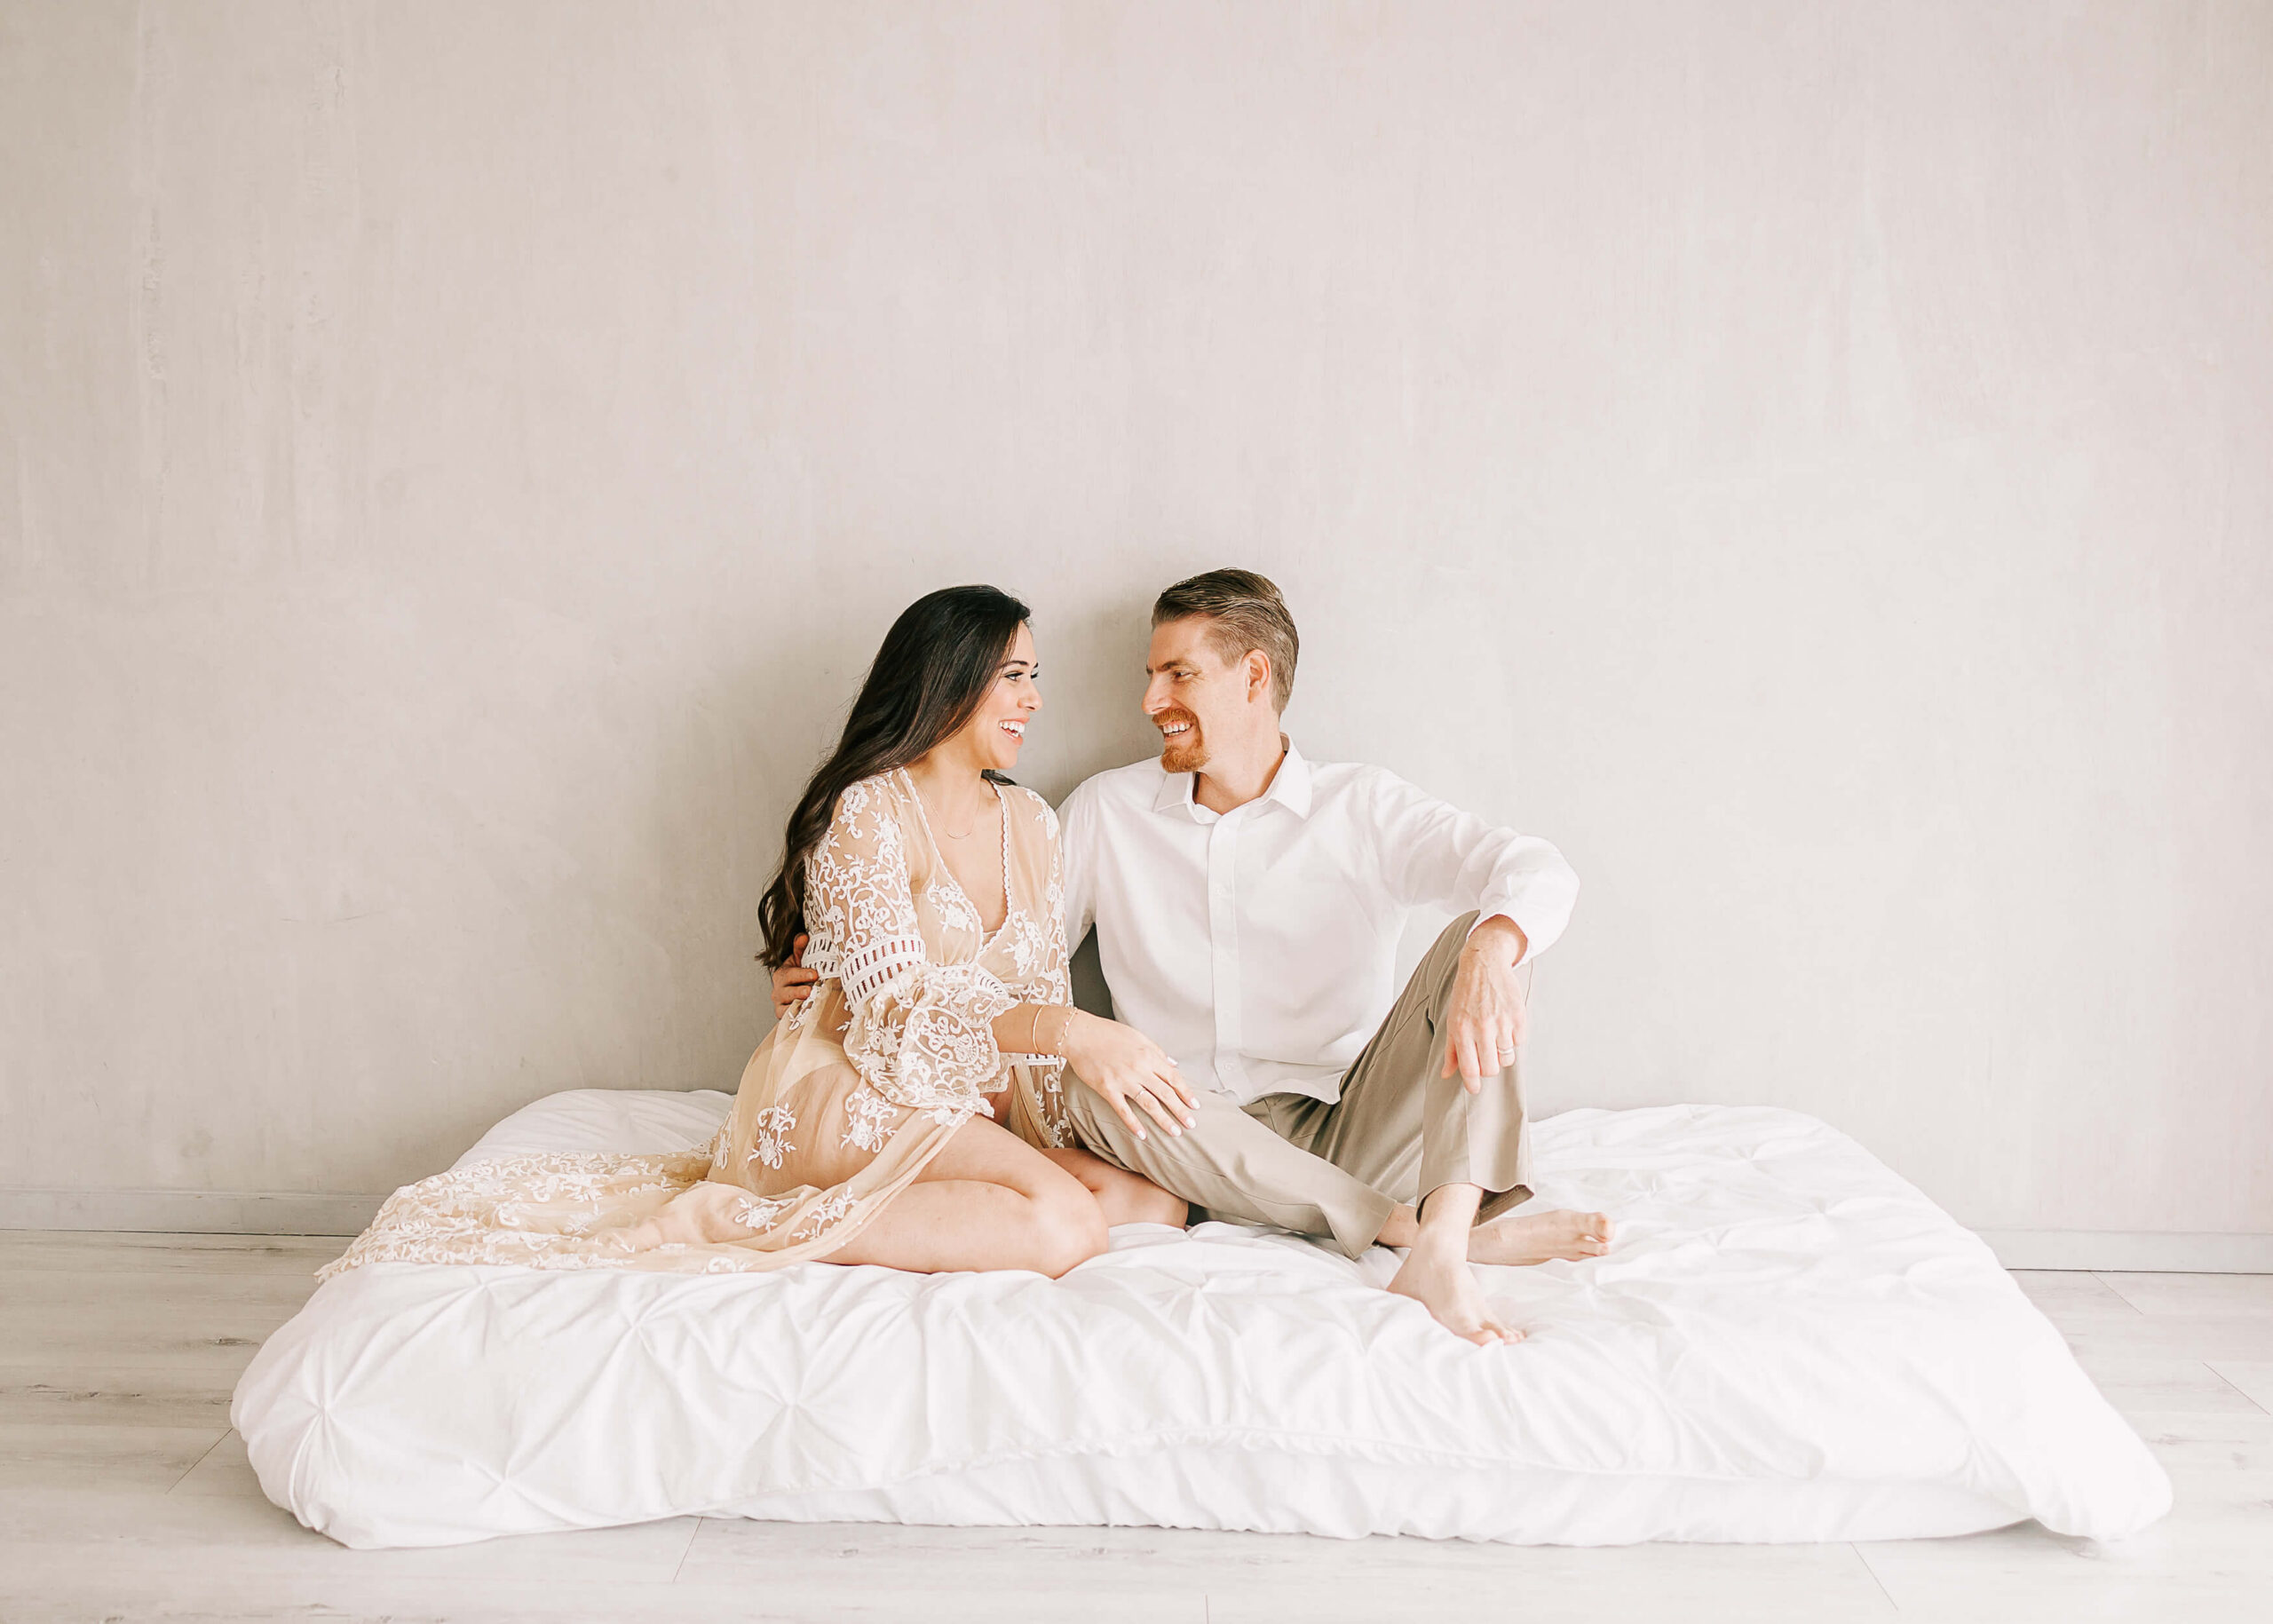 Excited expectant parents laughing and chatting on bed in studio by Ashley Nicole Photography.